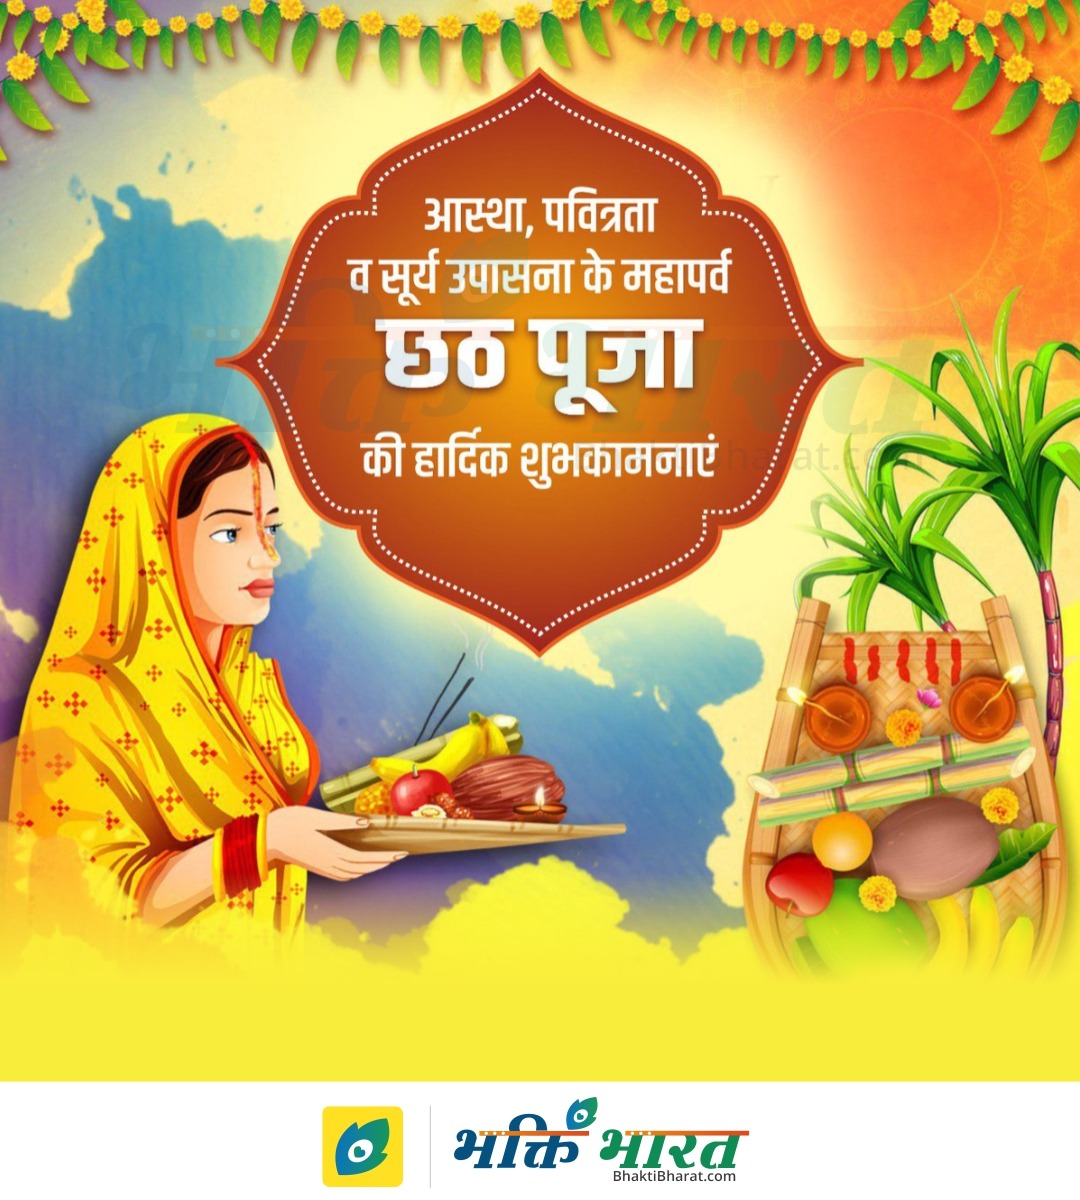 The significance behind Chhath Puja